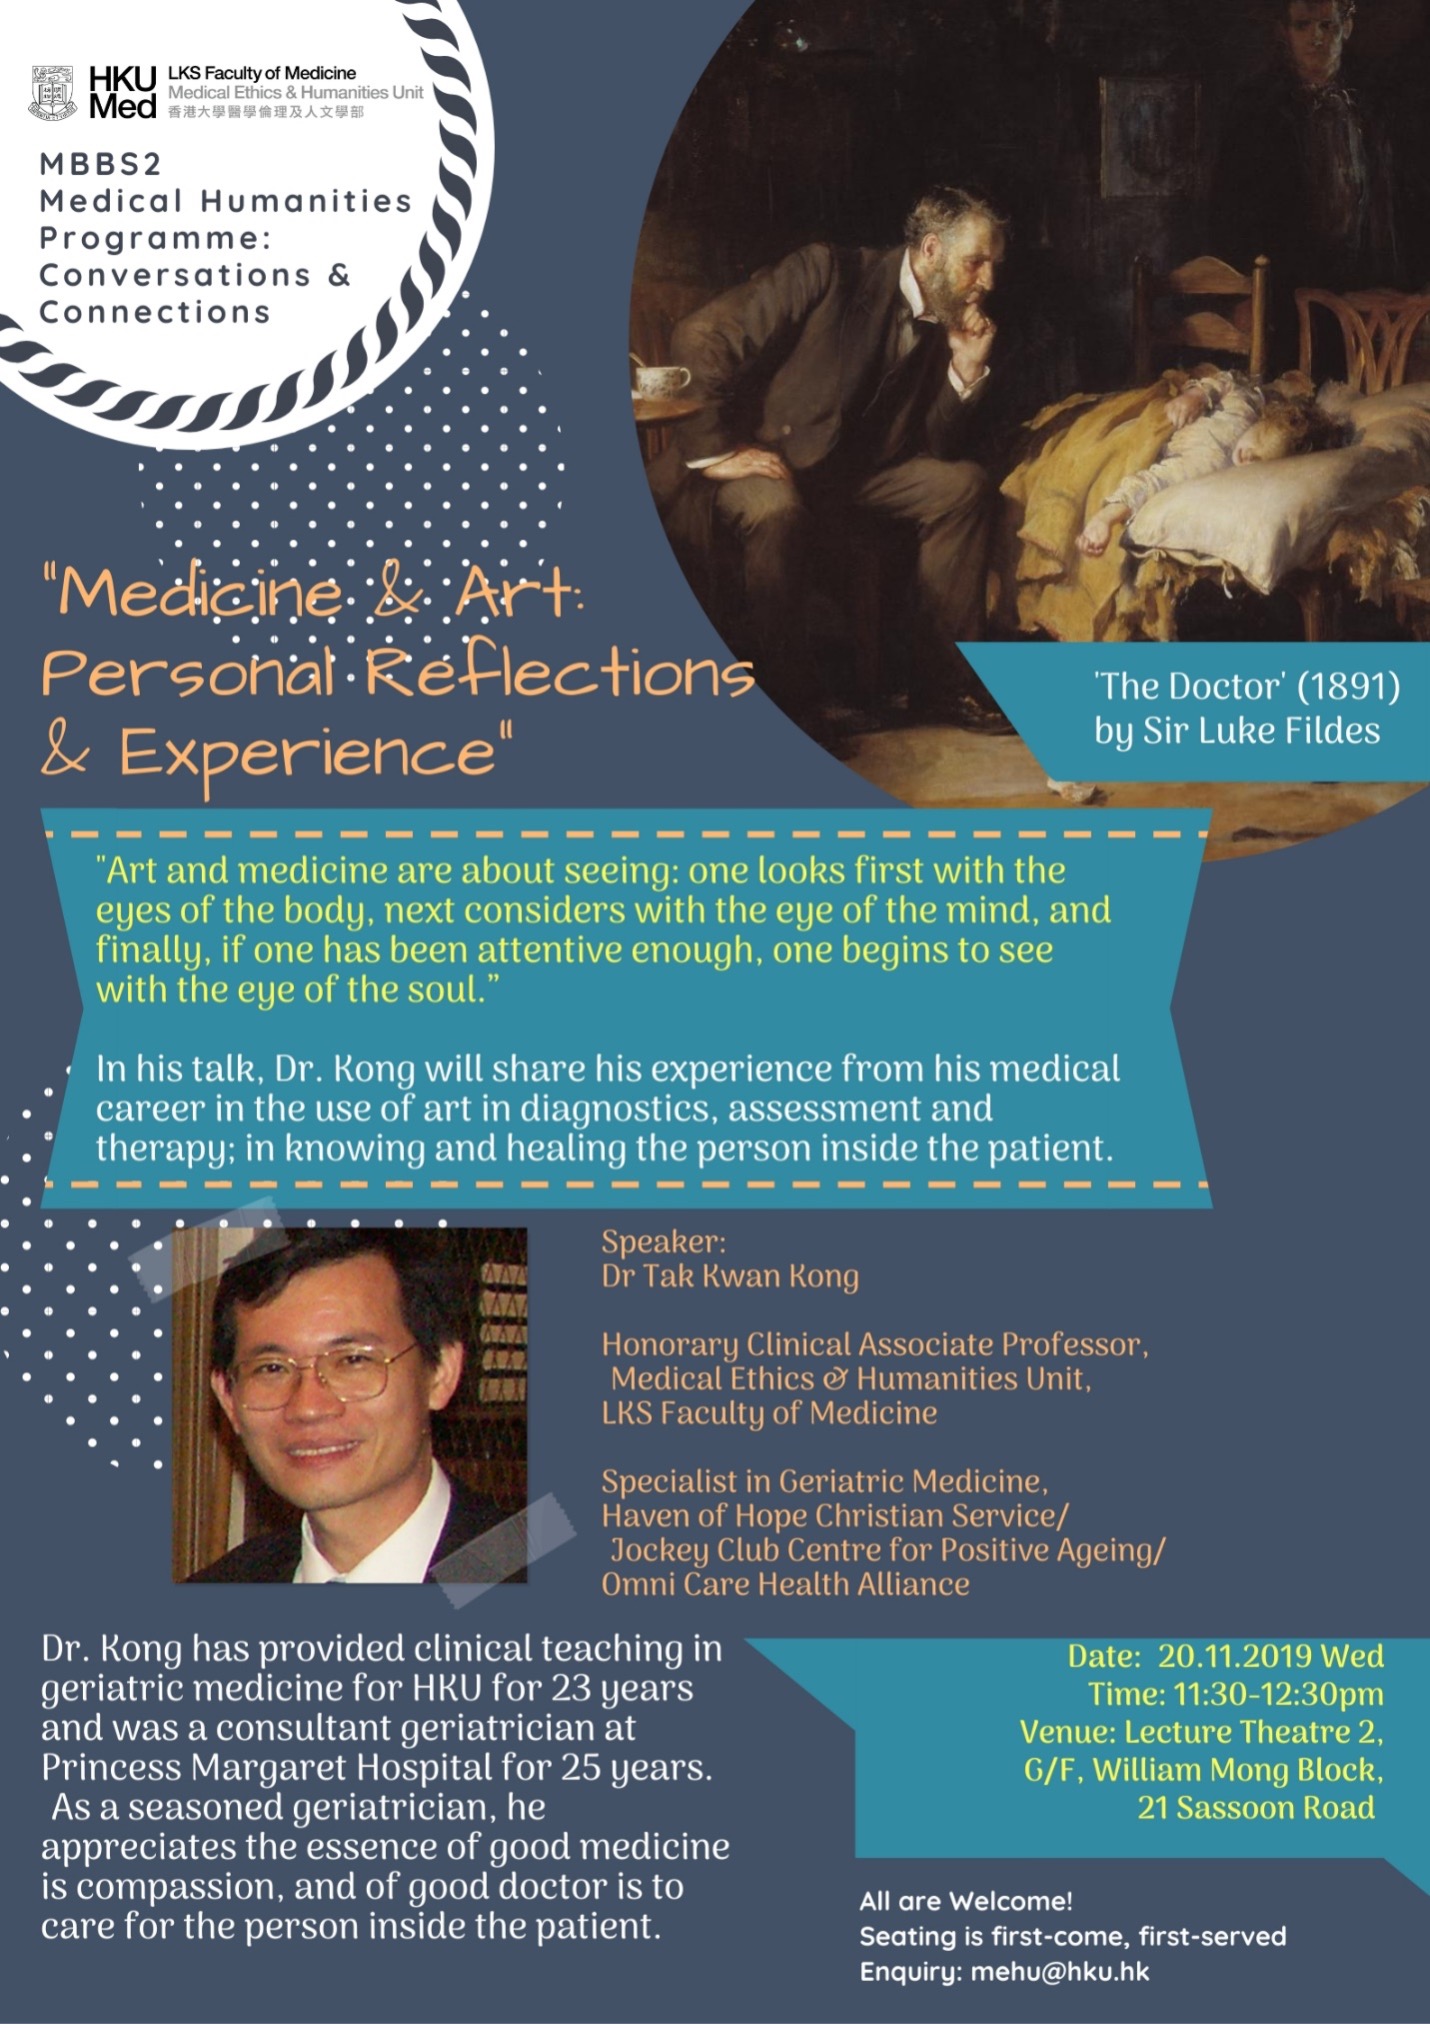 “Medicine & Art: Personal Reflections & Experience”